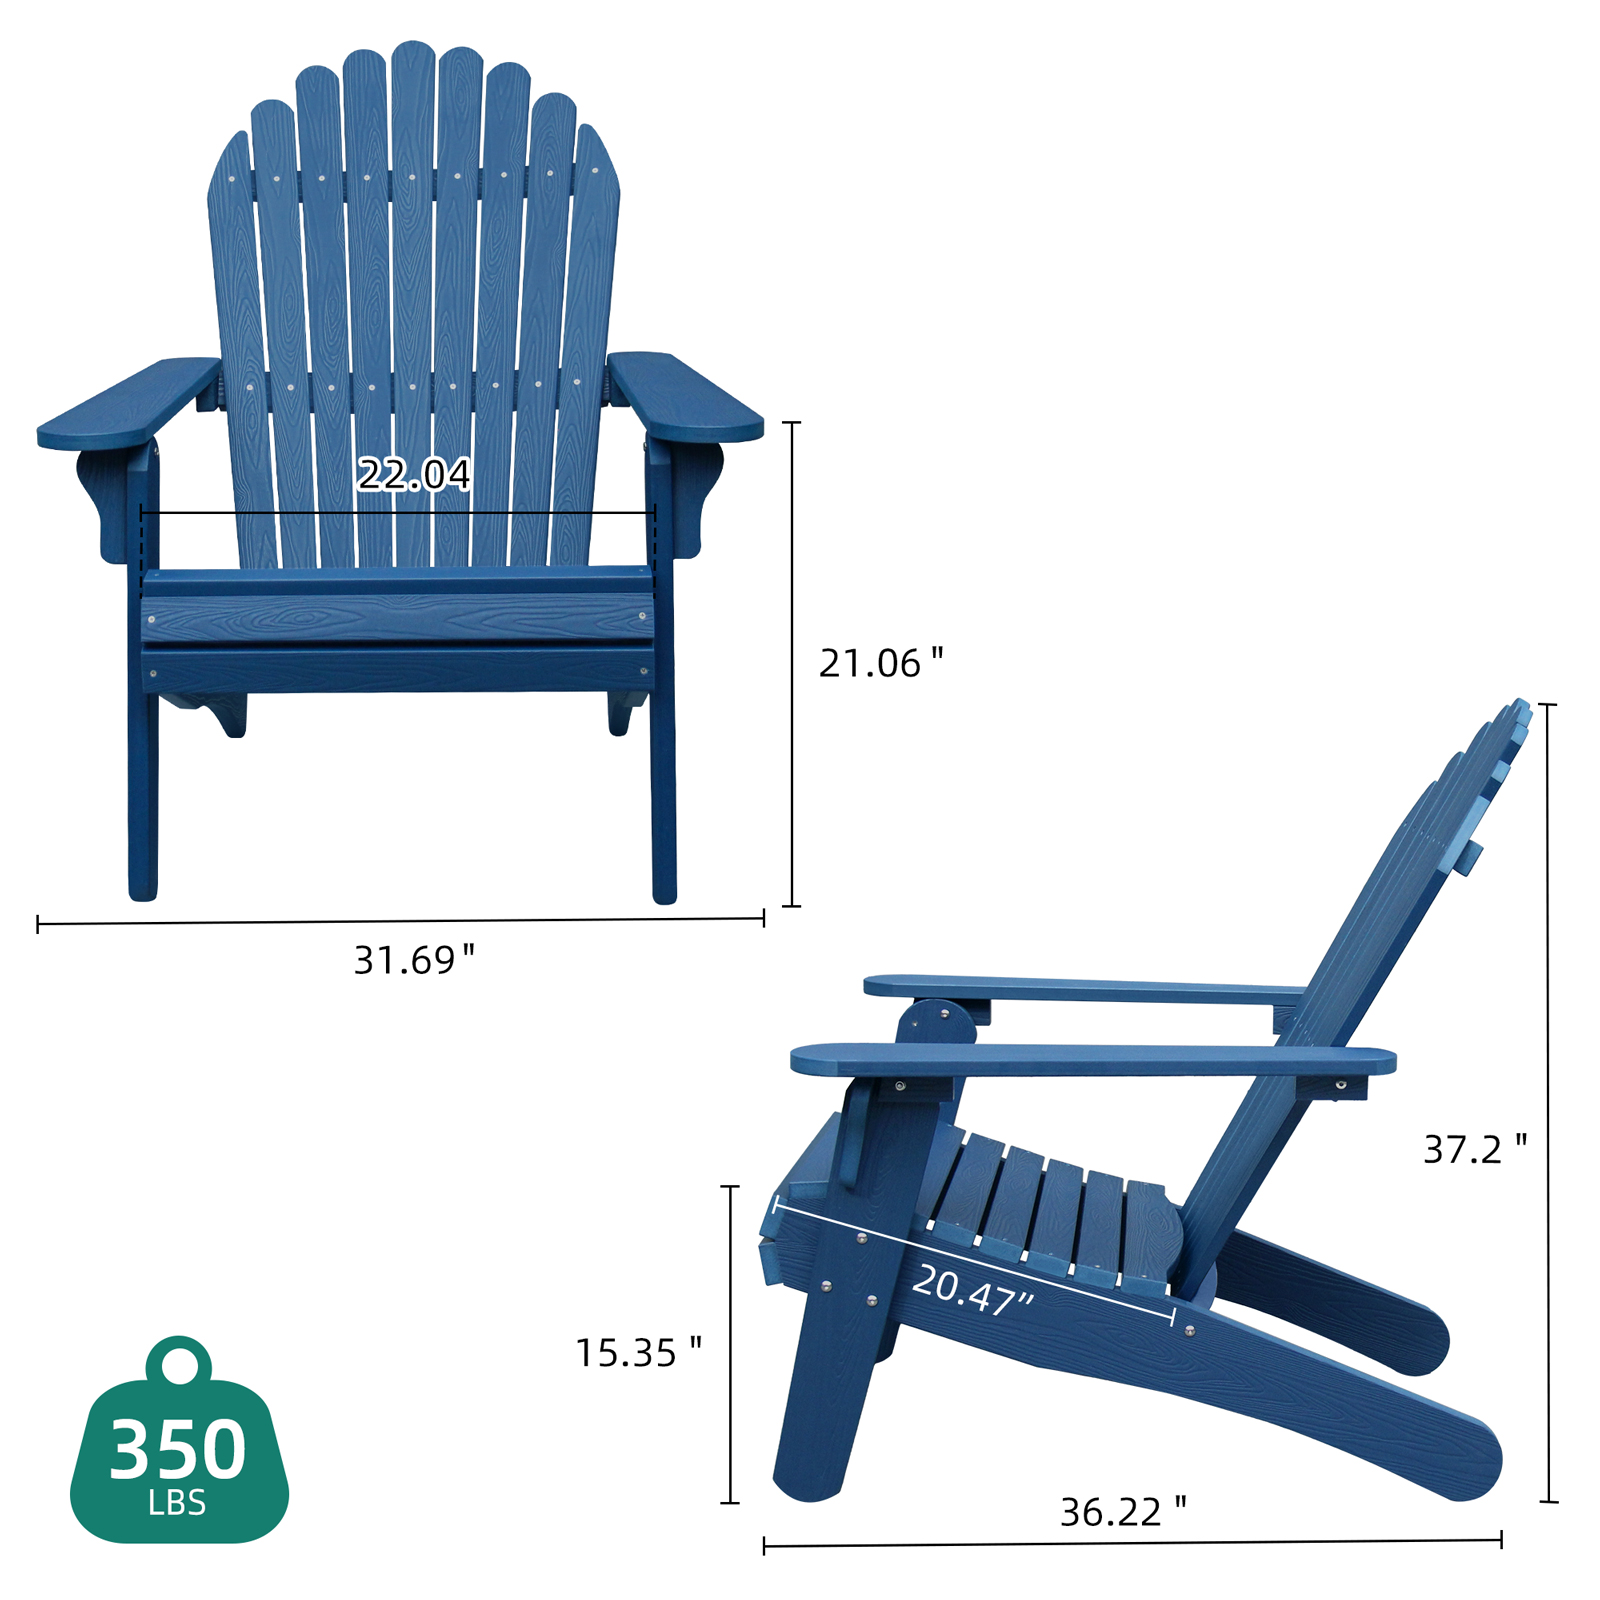 Dextrus 2 PCS Outdoor Adirondack Chair Wooden Lounge Patio Chair Fire Pit Chair for Garden for Patio Pool Deck Lawn and Garden, Navy Blue - image 5 of 8